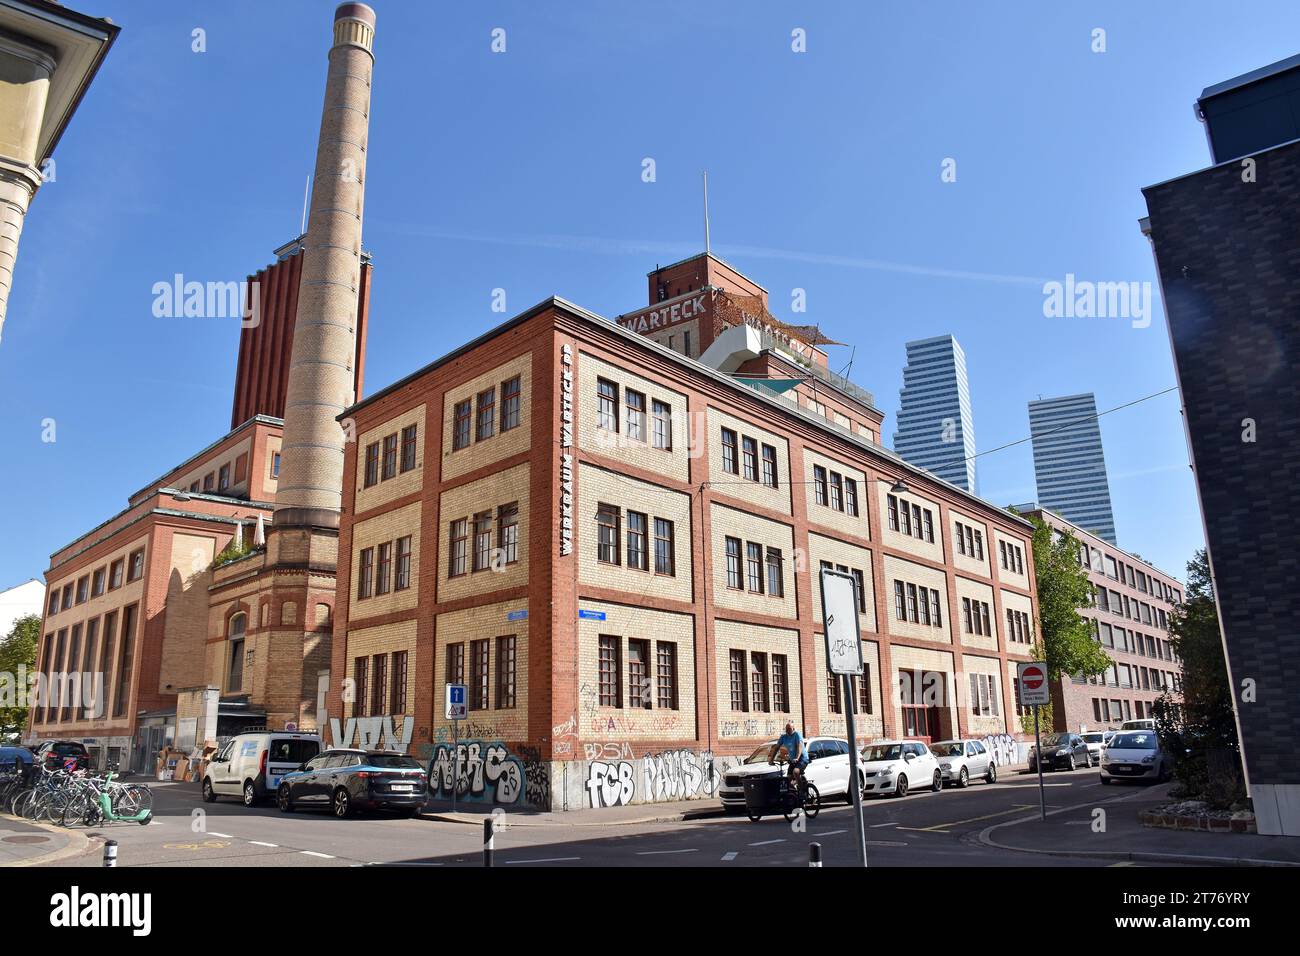 The former Warteck brewery, in Basel, brilliantly recycled into a multi-function building with studios, cultural projects, restaurants, events etc Stock Photo